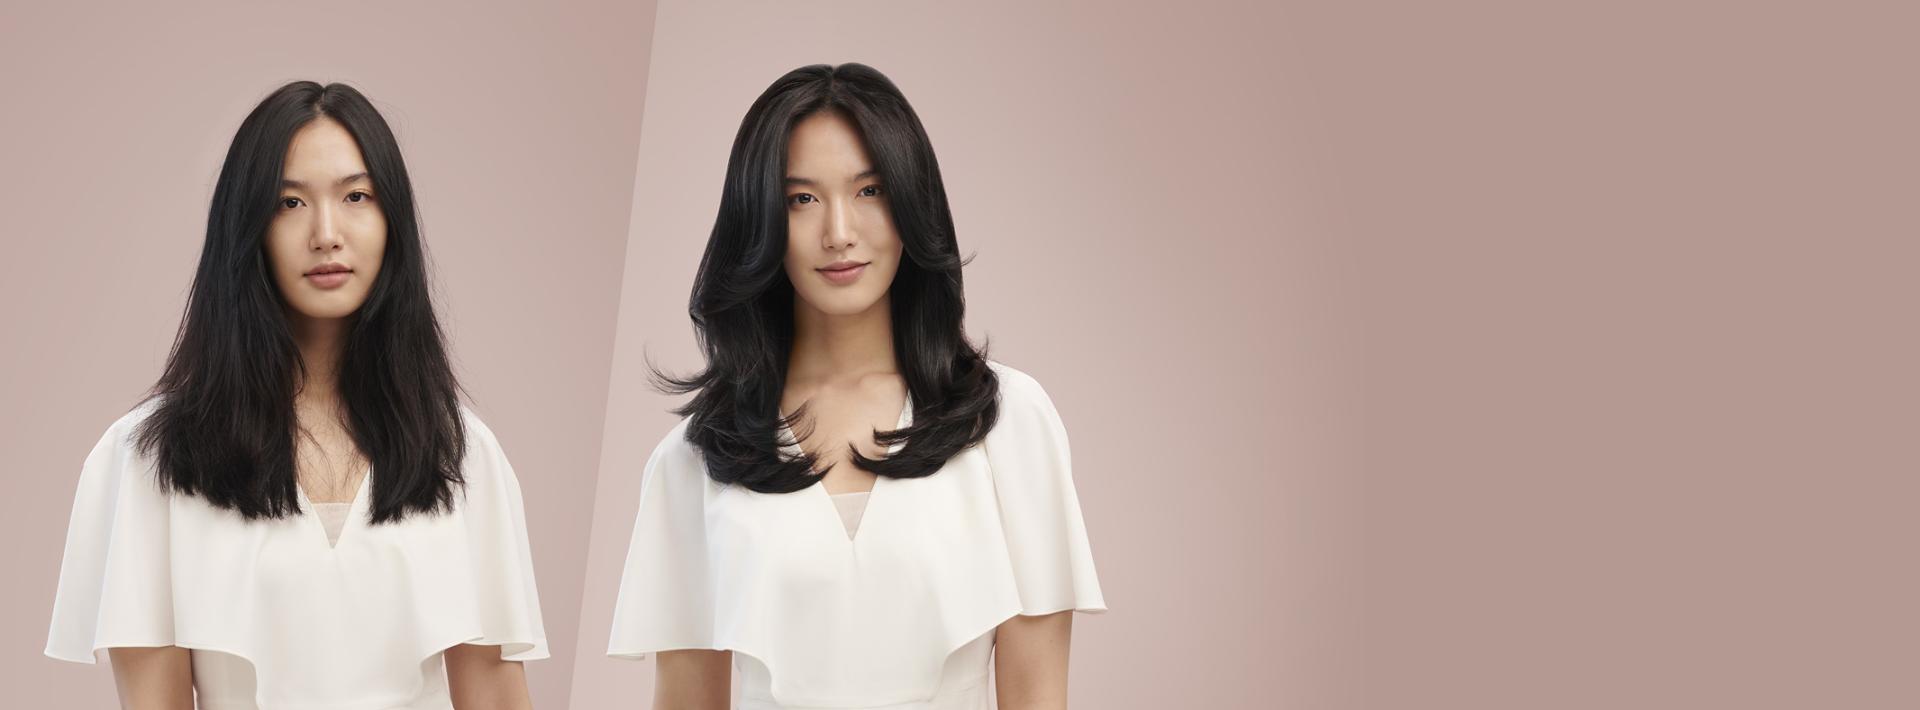 Model with type 1 hair demonstrating her hair before and after being styled with the Dyson Airwrap multi-styler.